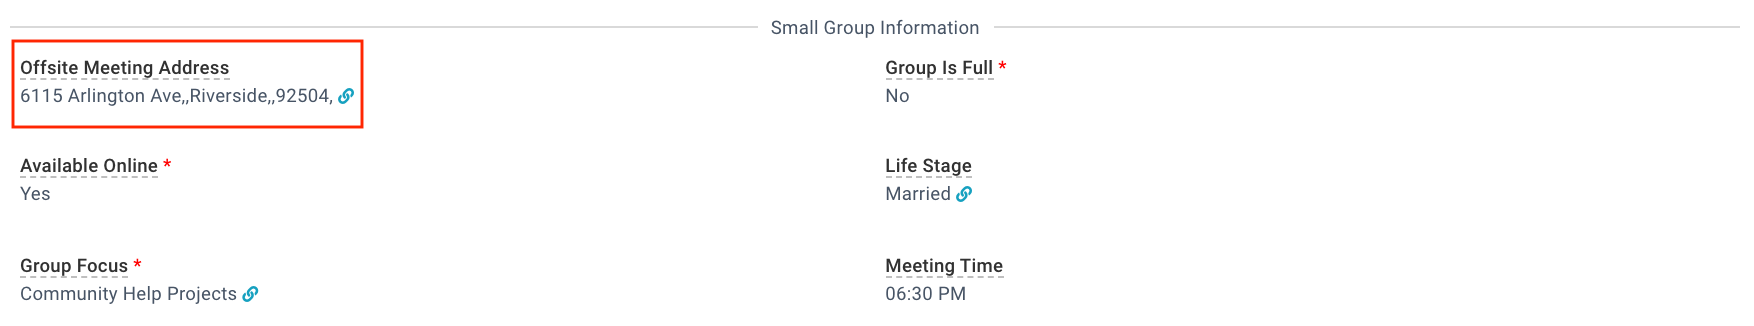 Image displaying the Offsite Meeting Address field in the Small Group Information section.